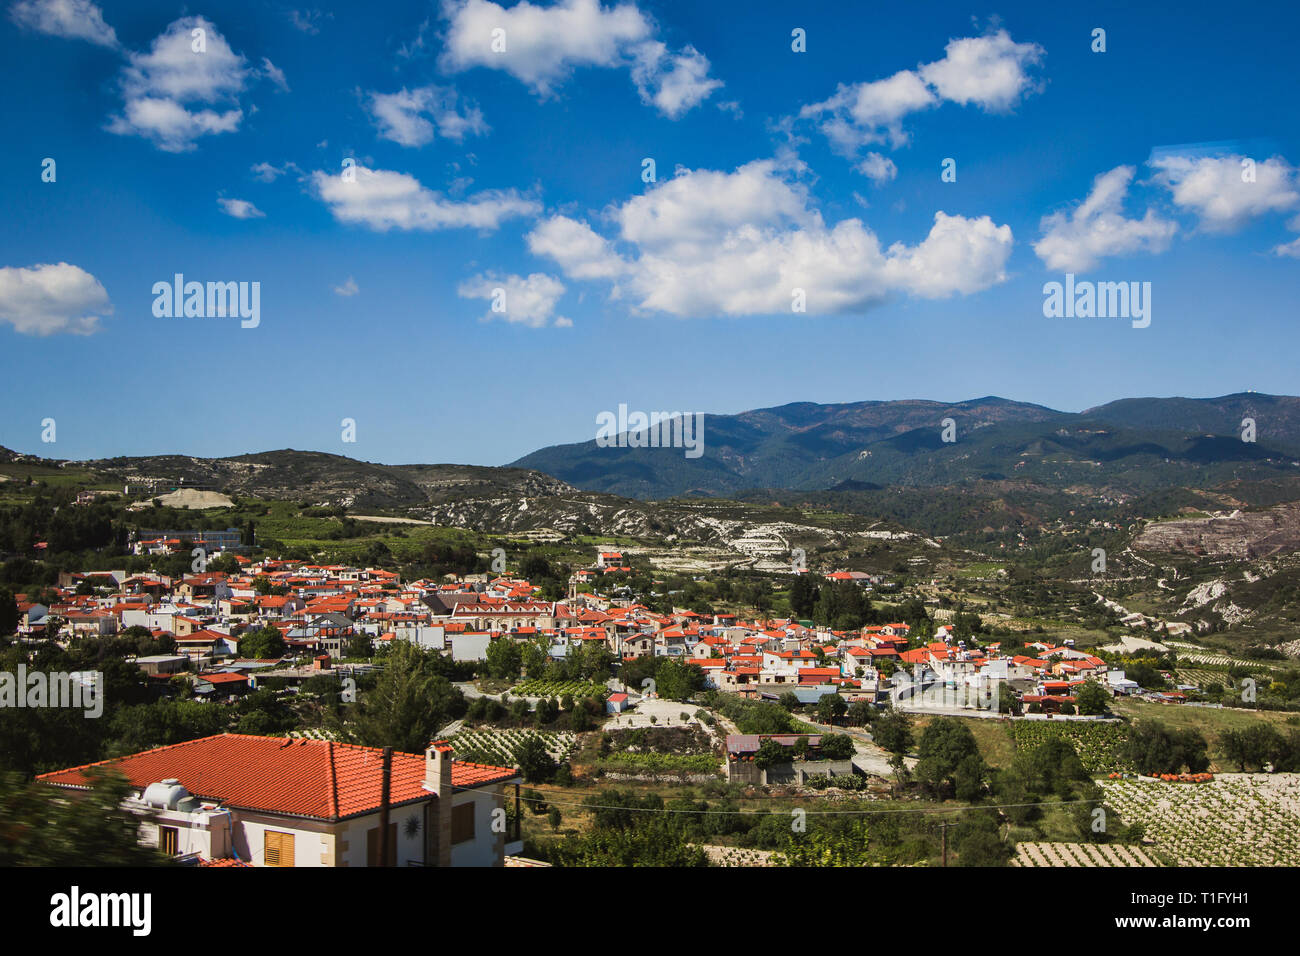 Orange roofs. Panoramic view near of Kato Lefkara - is the most famous village in the Troodos Mountains. Limassol district, Cyprus, Mediterranean Sea Stock Photo